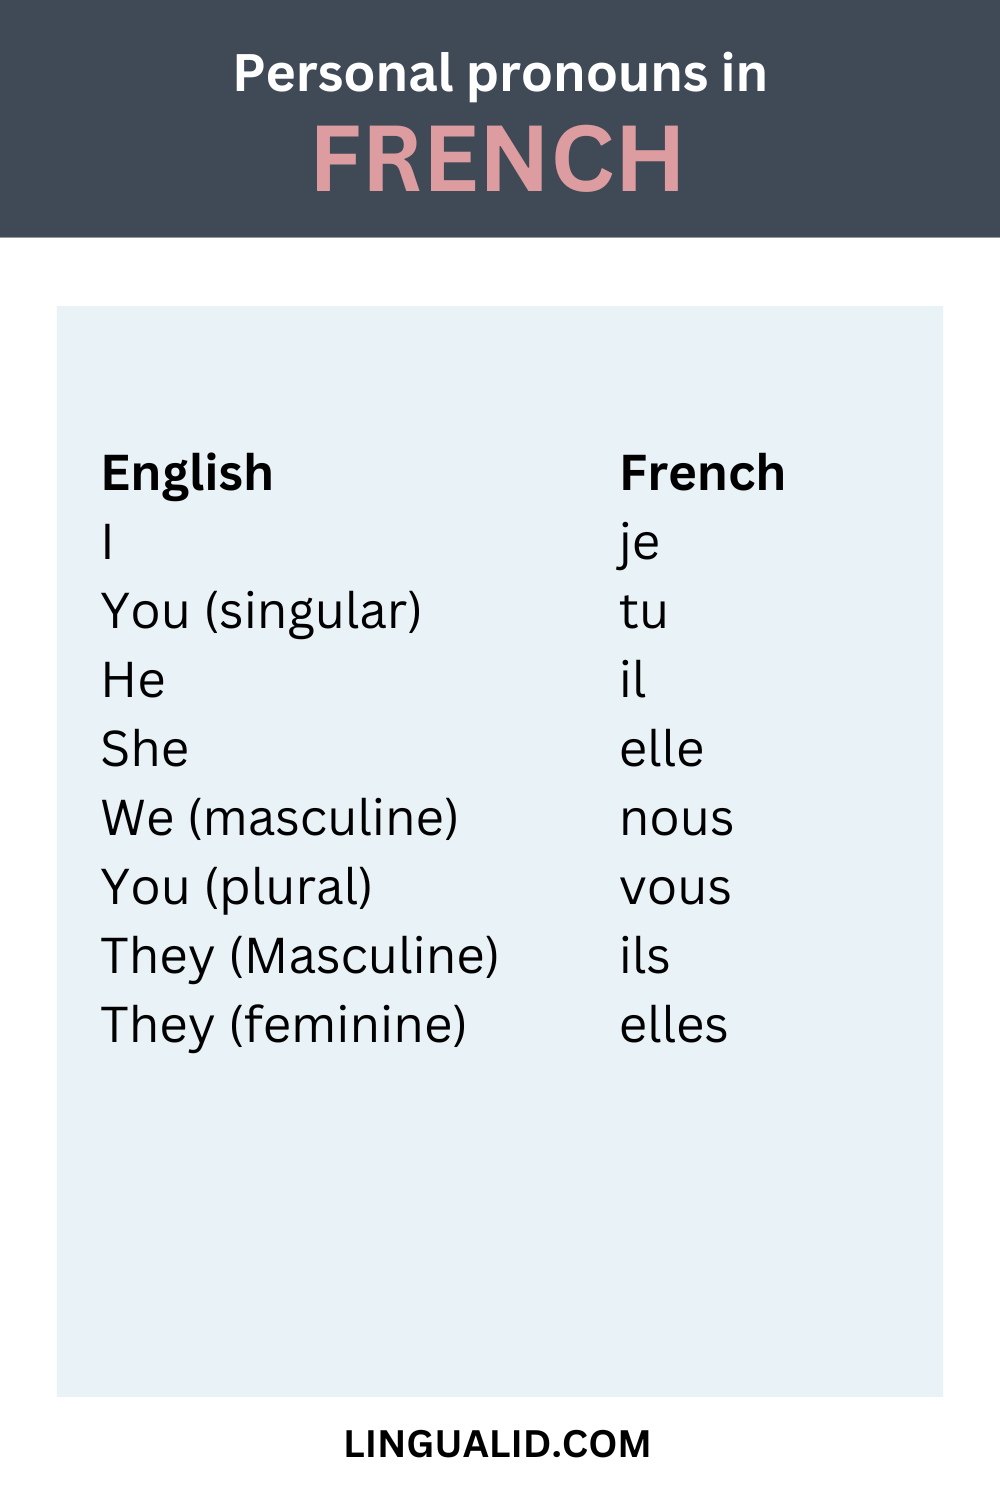 french-personal-pronouns-explained-lingualid